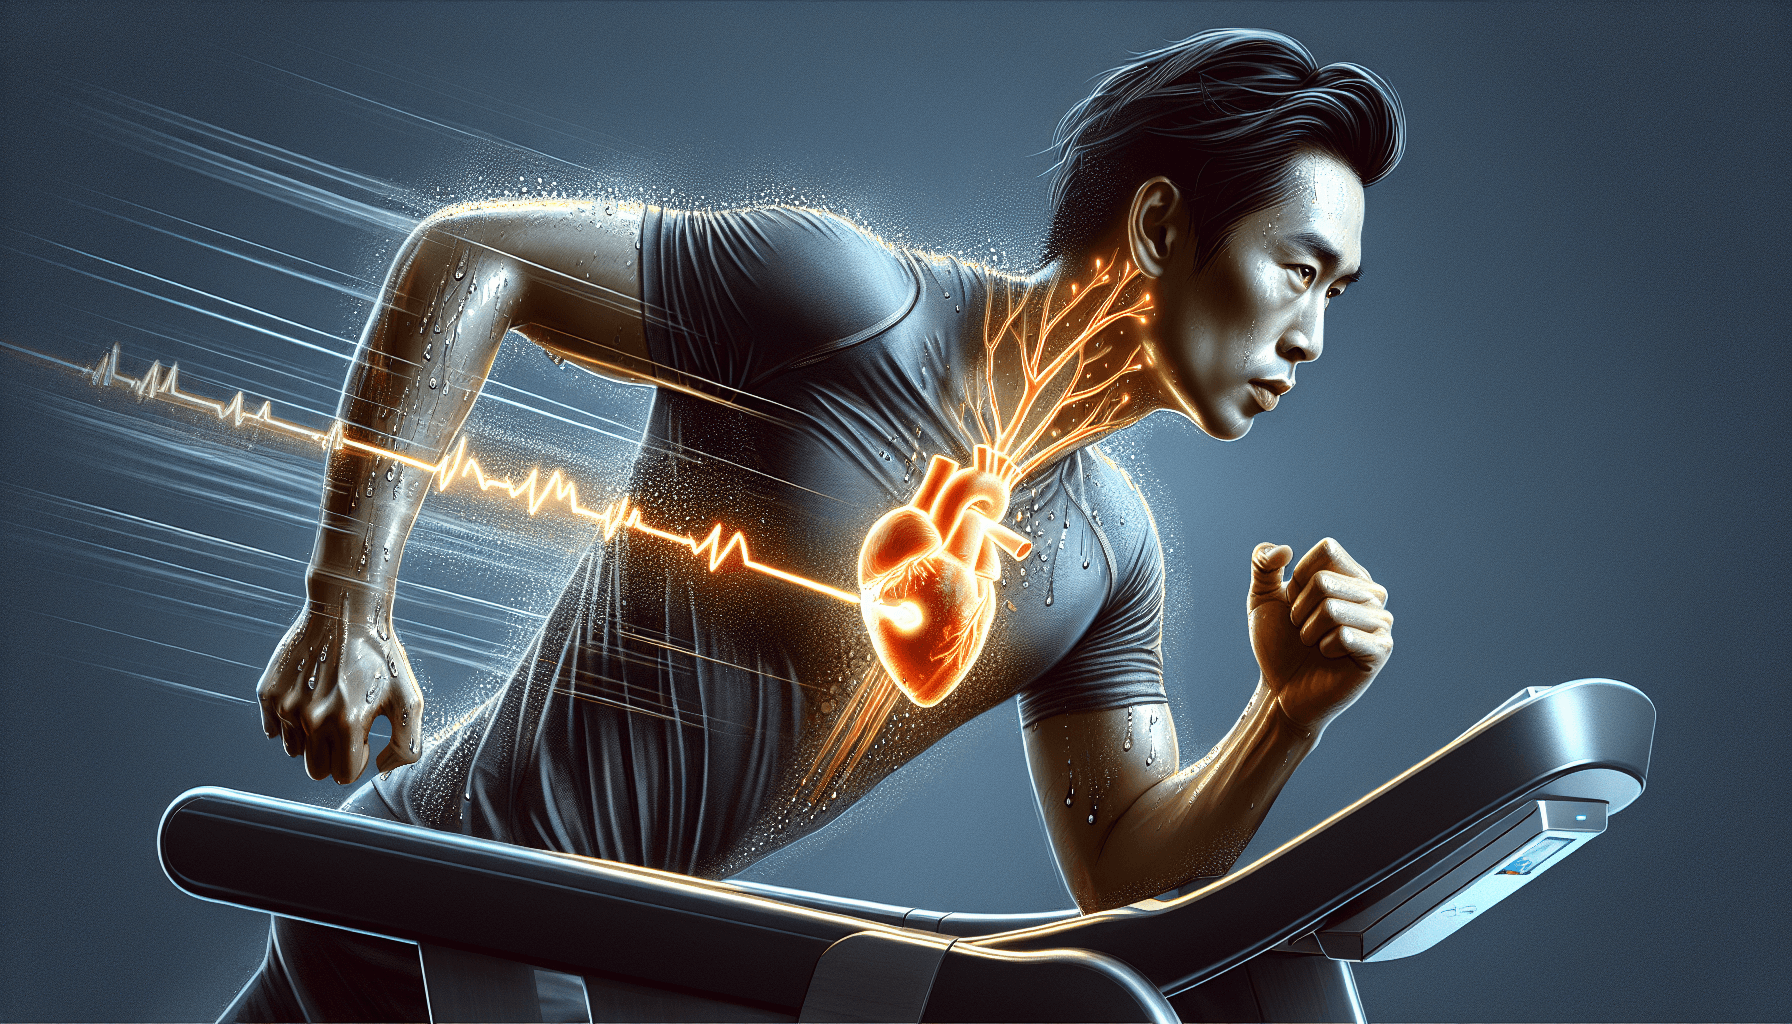 Illustration of a person engaging in endurance exercise, risk for exercise induced afib